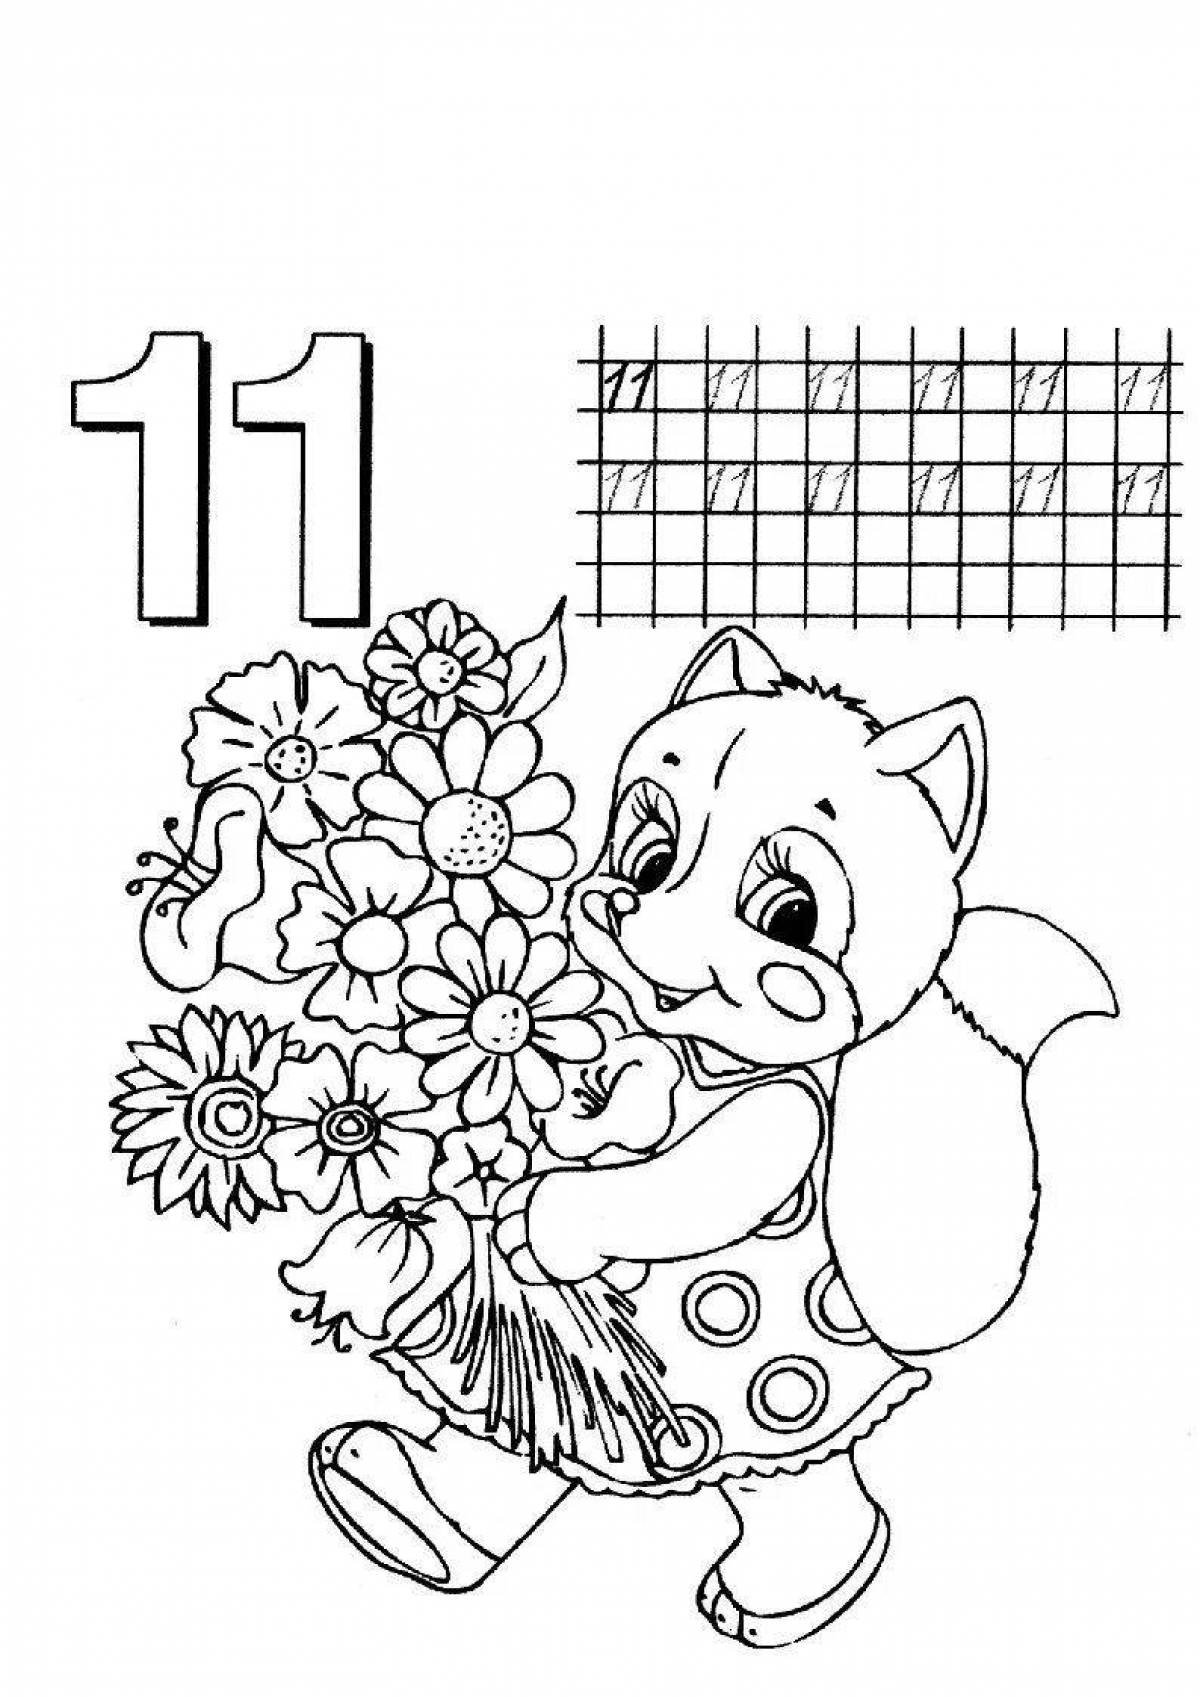 Amazing coloring book learning numbers